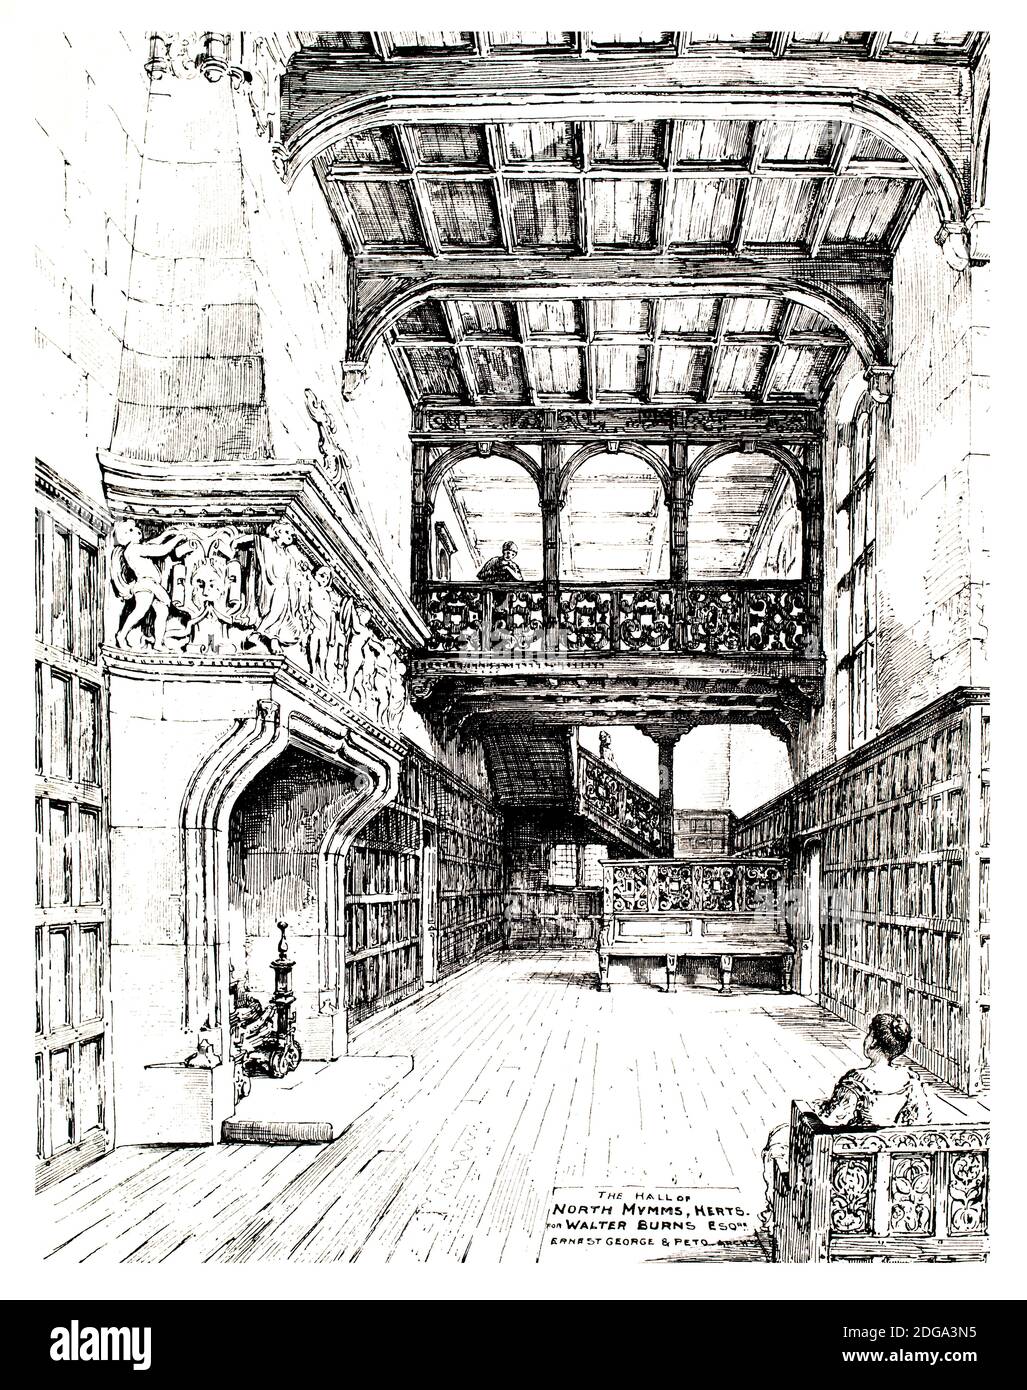 Hertfordshire, North Mymms Place Hall illustration for Walter Burns by architects Ernest George and Peto from 1896 The Studio an Illustrated Magazine Stock Photo